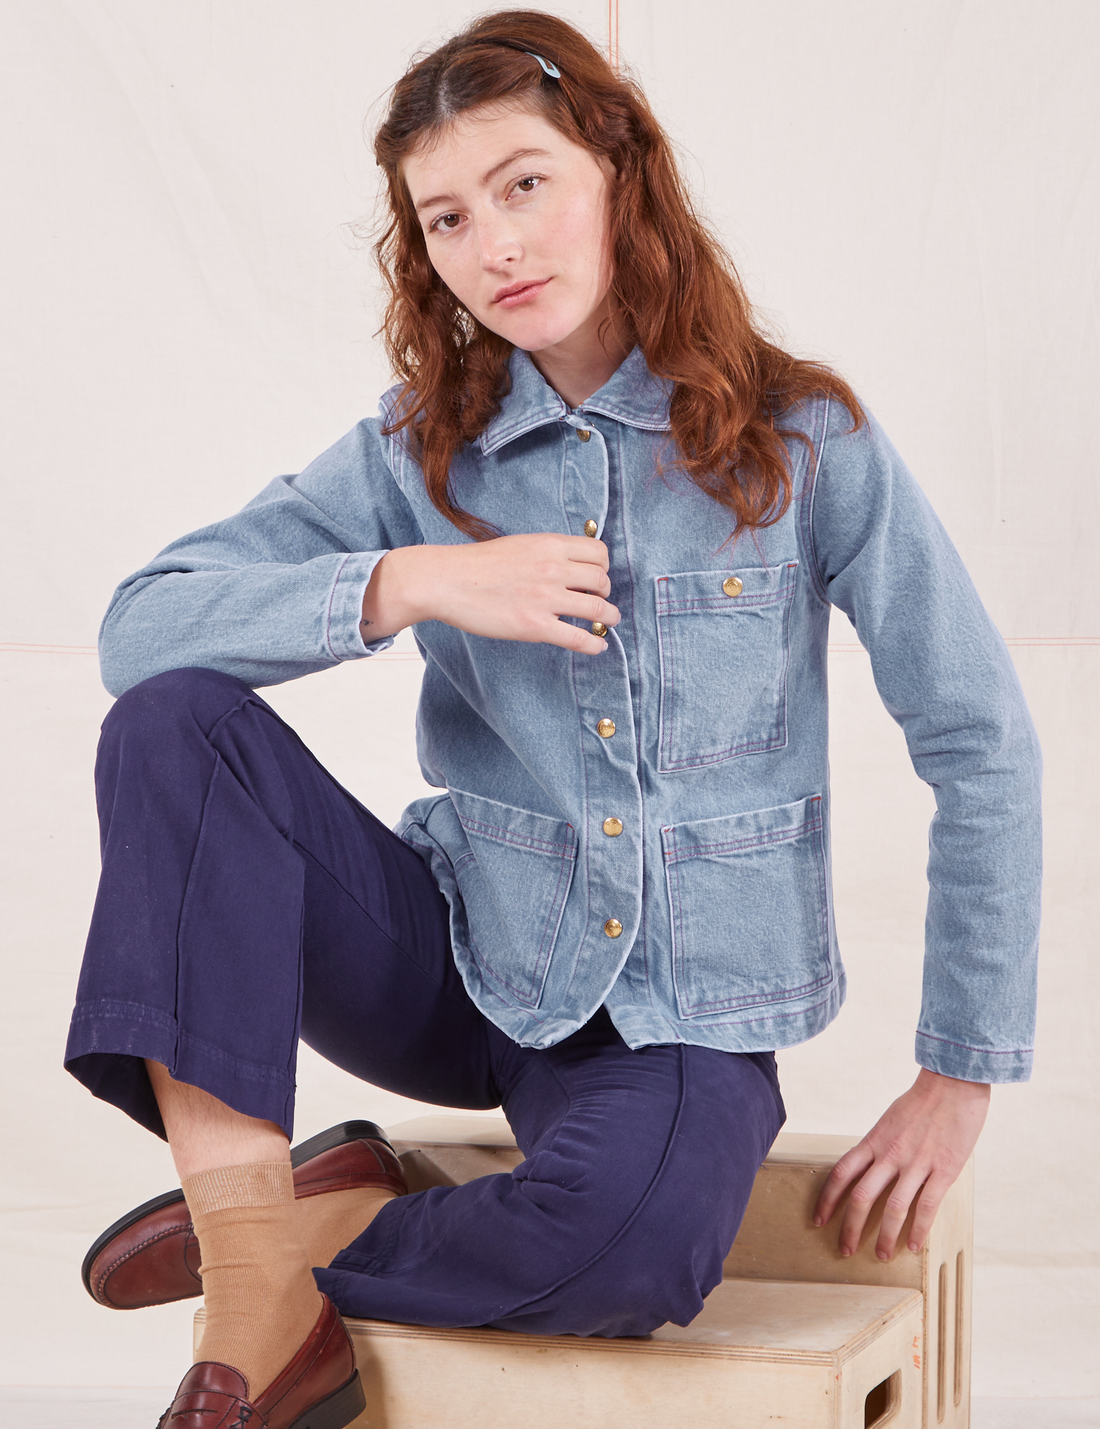 Alex is 5'8" and wearing XXS Indigo Denim Work Jacket in Light Wash paired with navy Western Pants